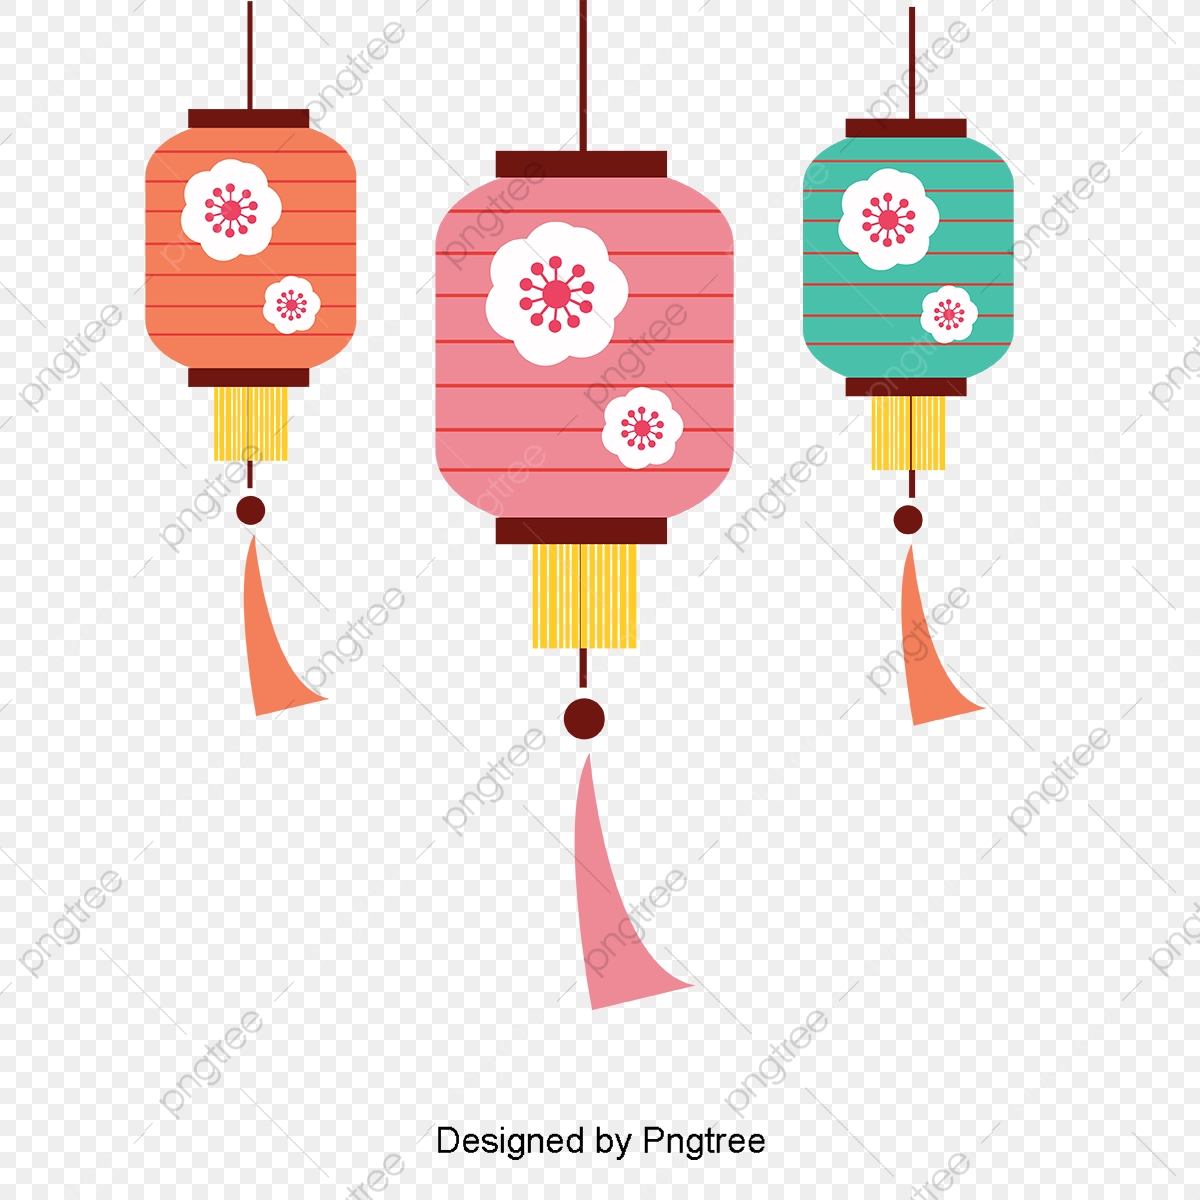 lantern clipart culture chinese